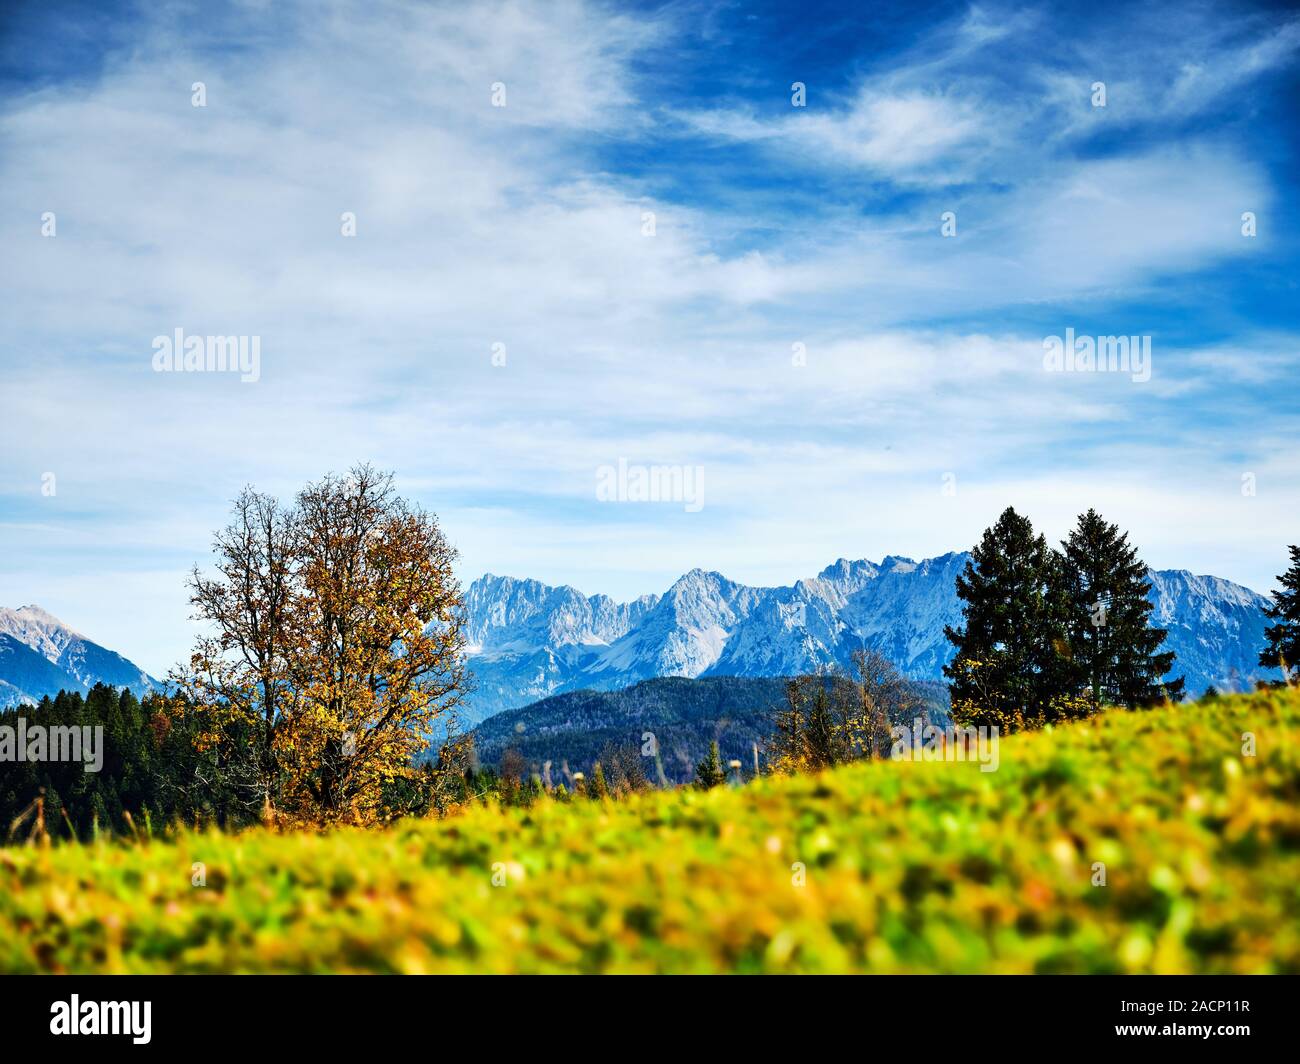 View from the top of mountain Eckbauer in Bavaria to alps in the region of Garmisch-Partenkirchen, Germany in autumn on a sunny day in autumn Stock Photo